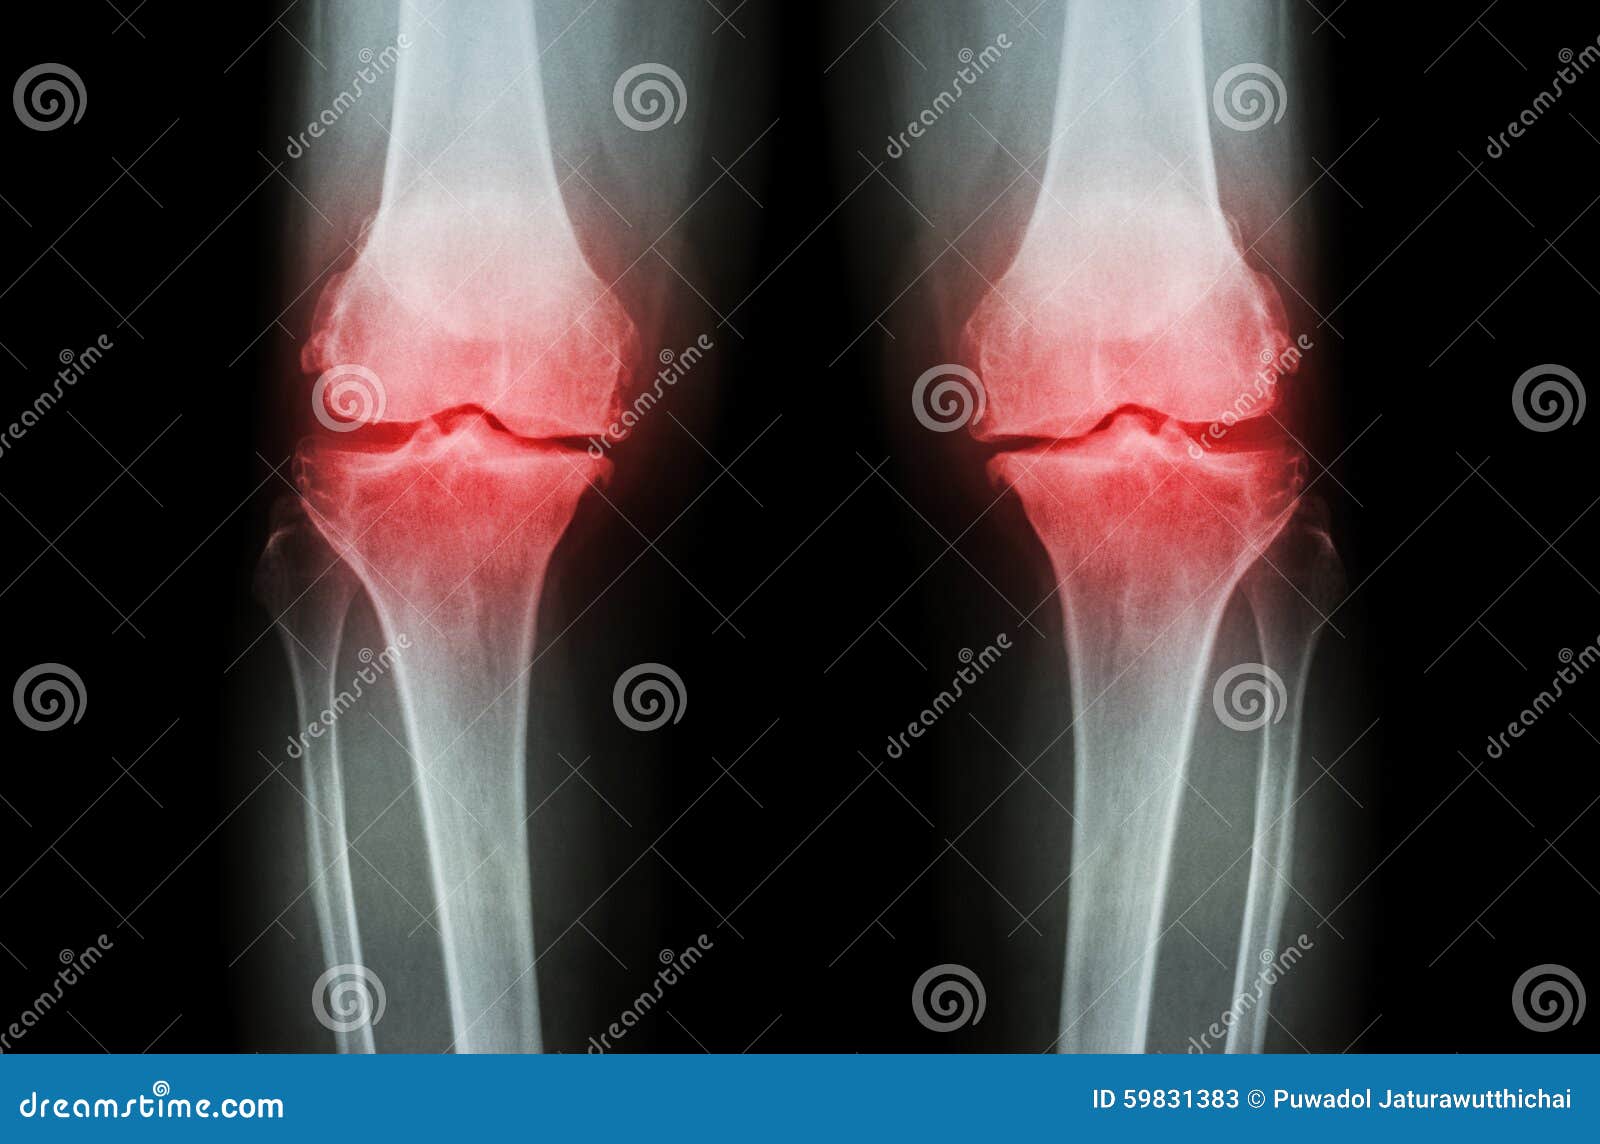 osteoarthritis knee ( oa knee ). film x-ray both knee ( front view ) show narrow joint space ( joint cartilage loss ) , osteophyte